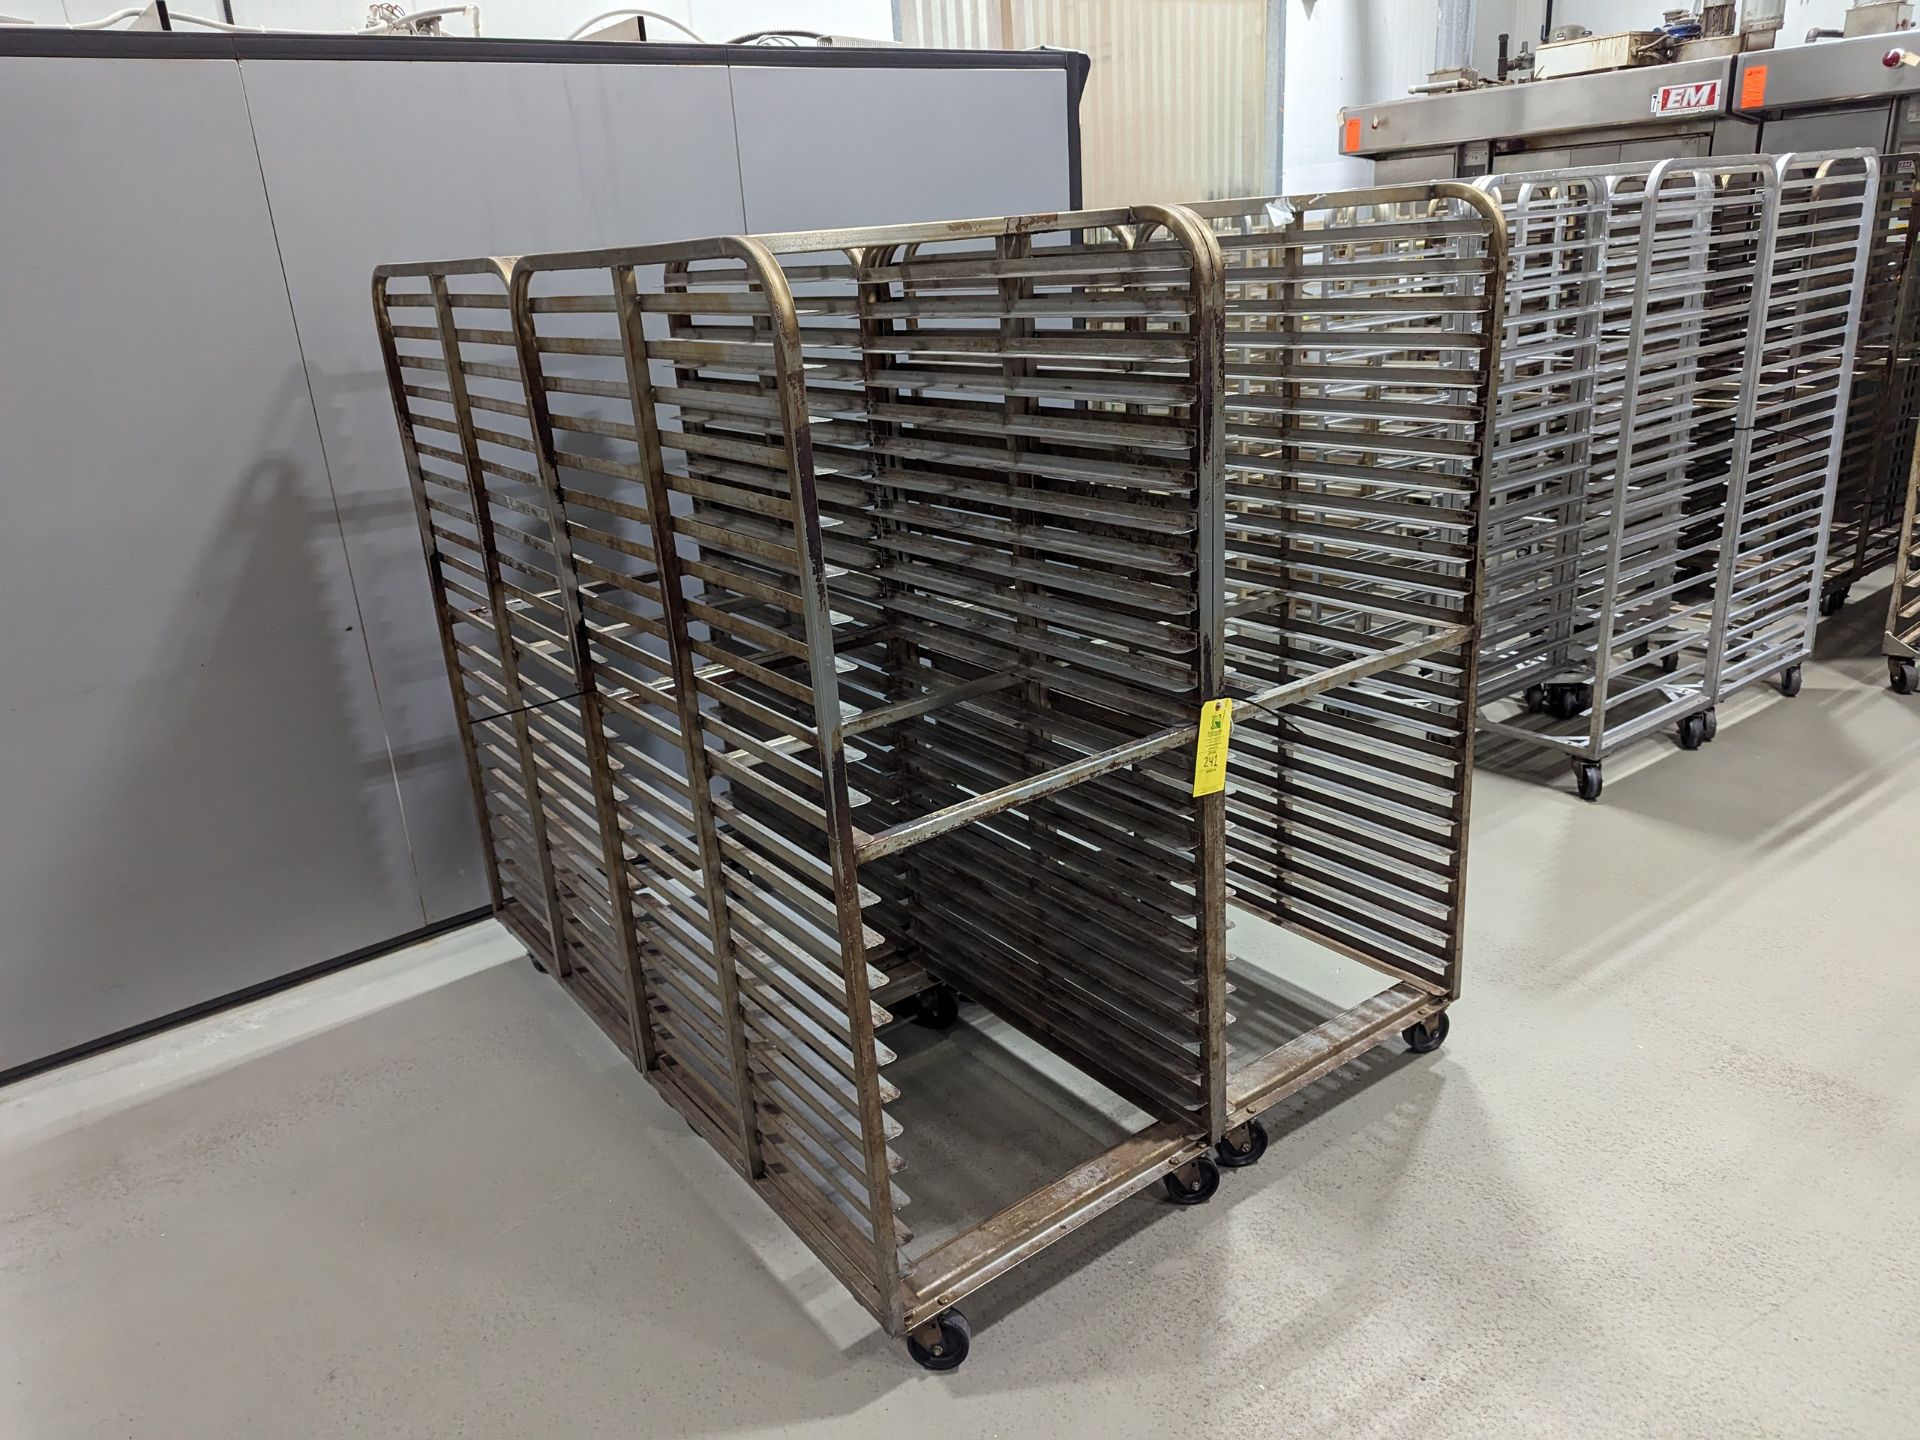 Lot of 4 Double Wide Stainless Steel Bakery Racks, Dimensions LxWxH: 72x57x69 Measurements are for l - Image 3 of 6